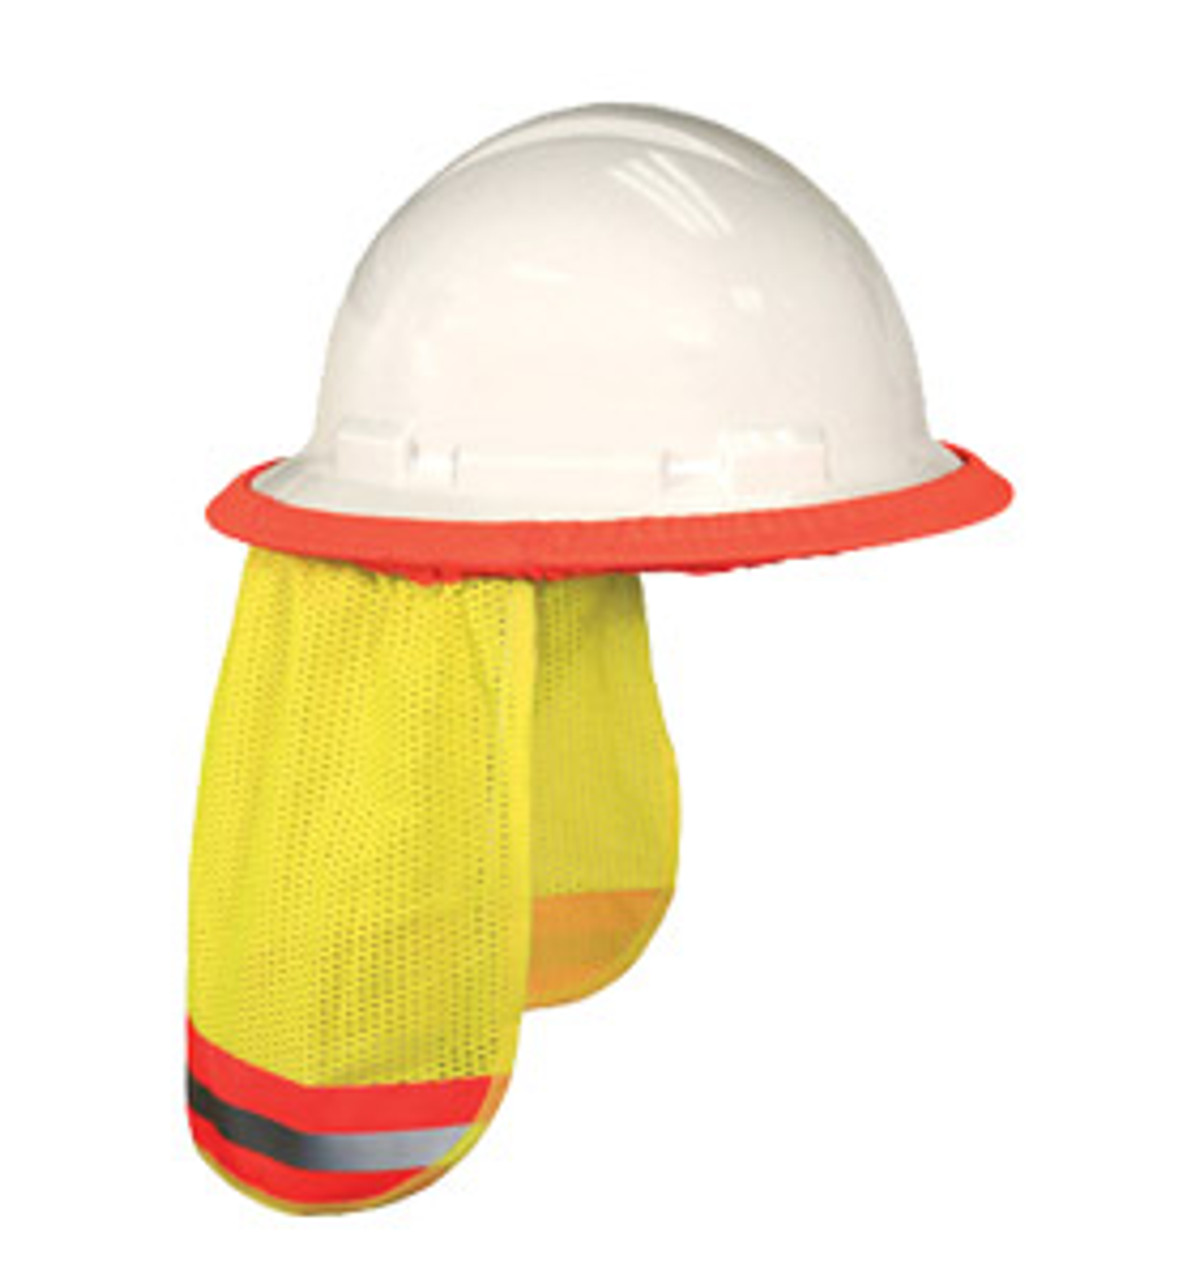 Hard Hat Neck Shade - Calolympic Safety